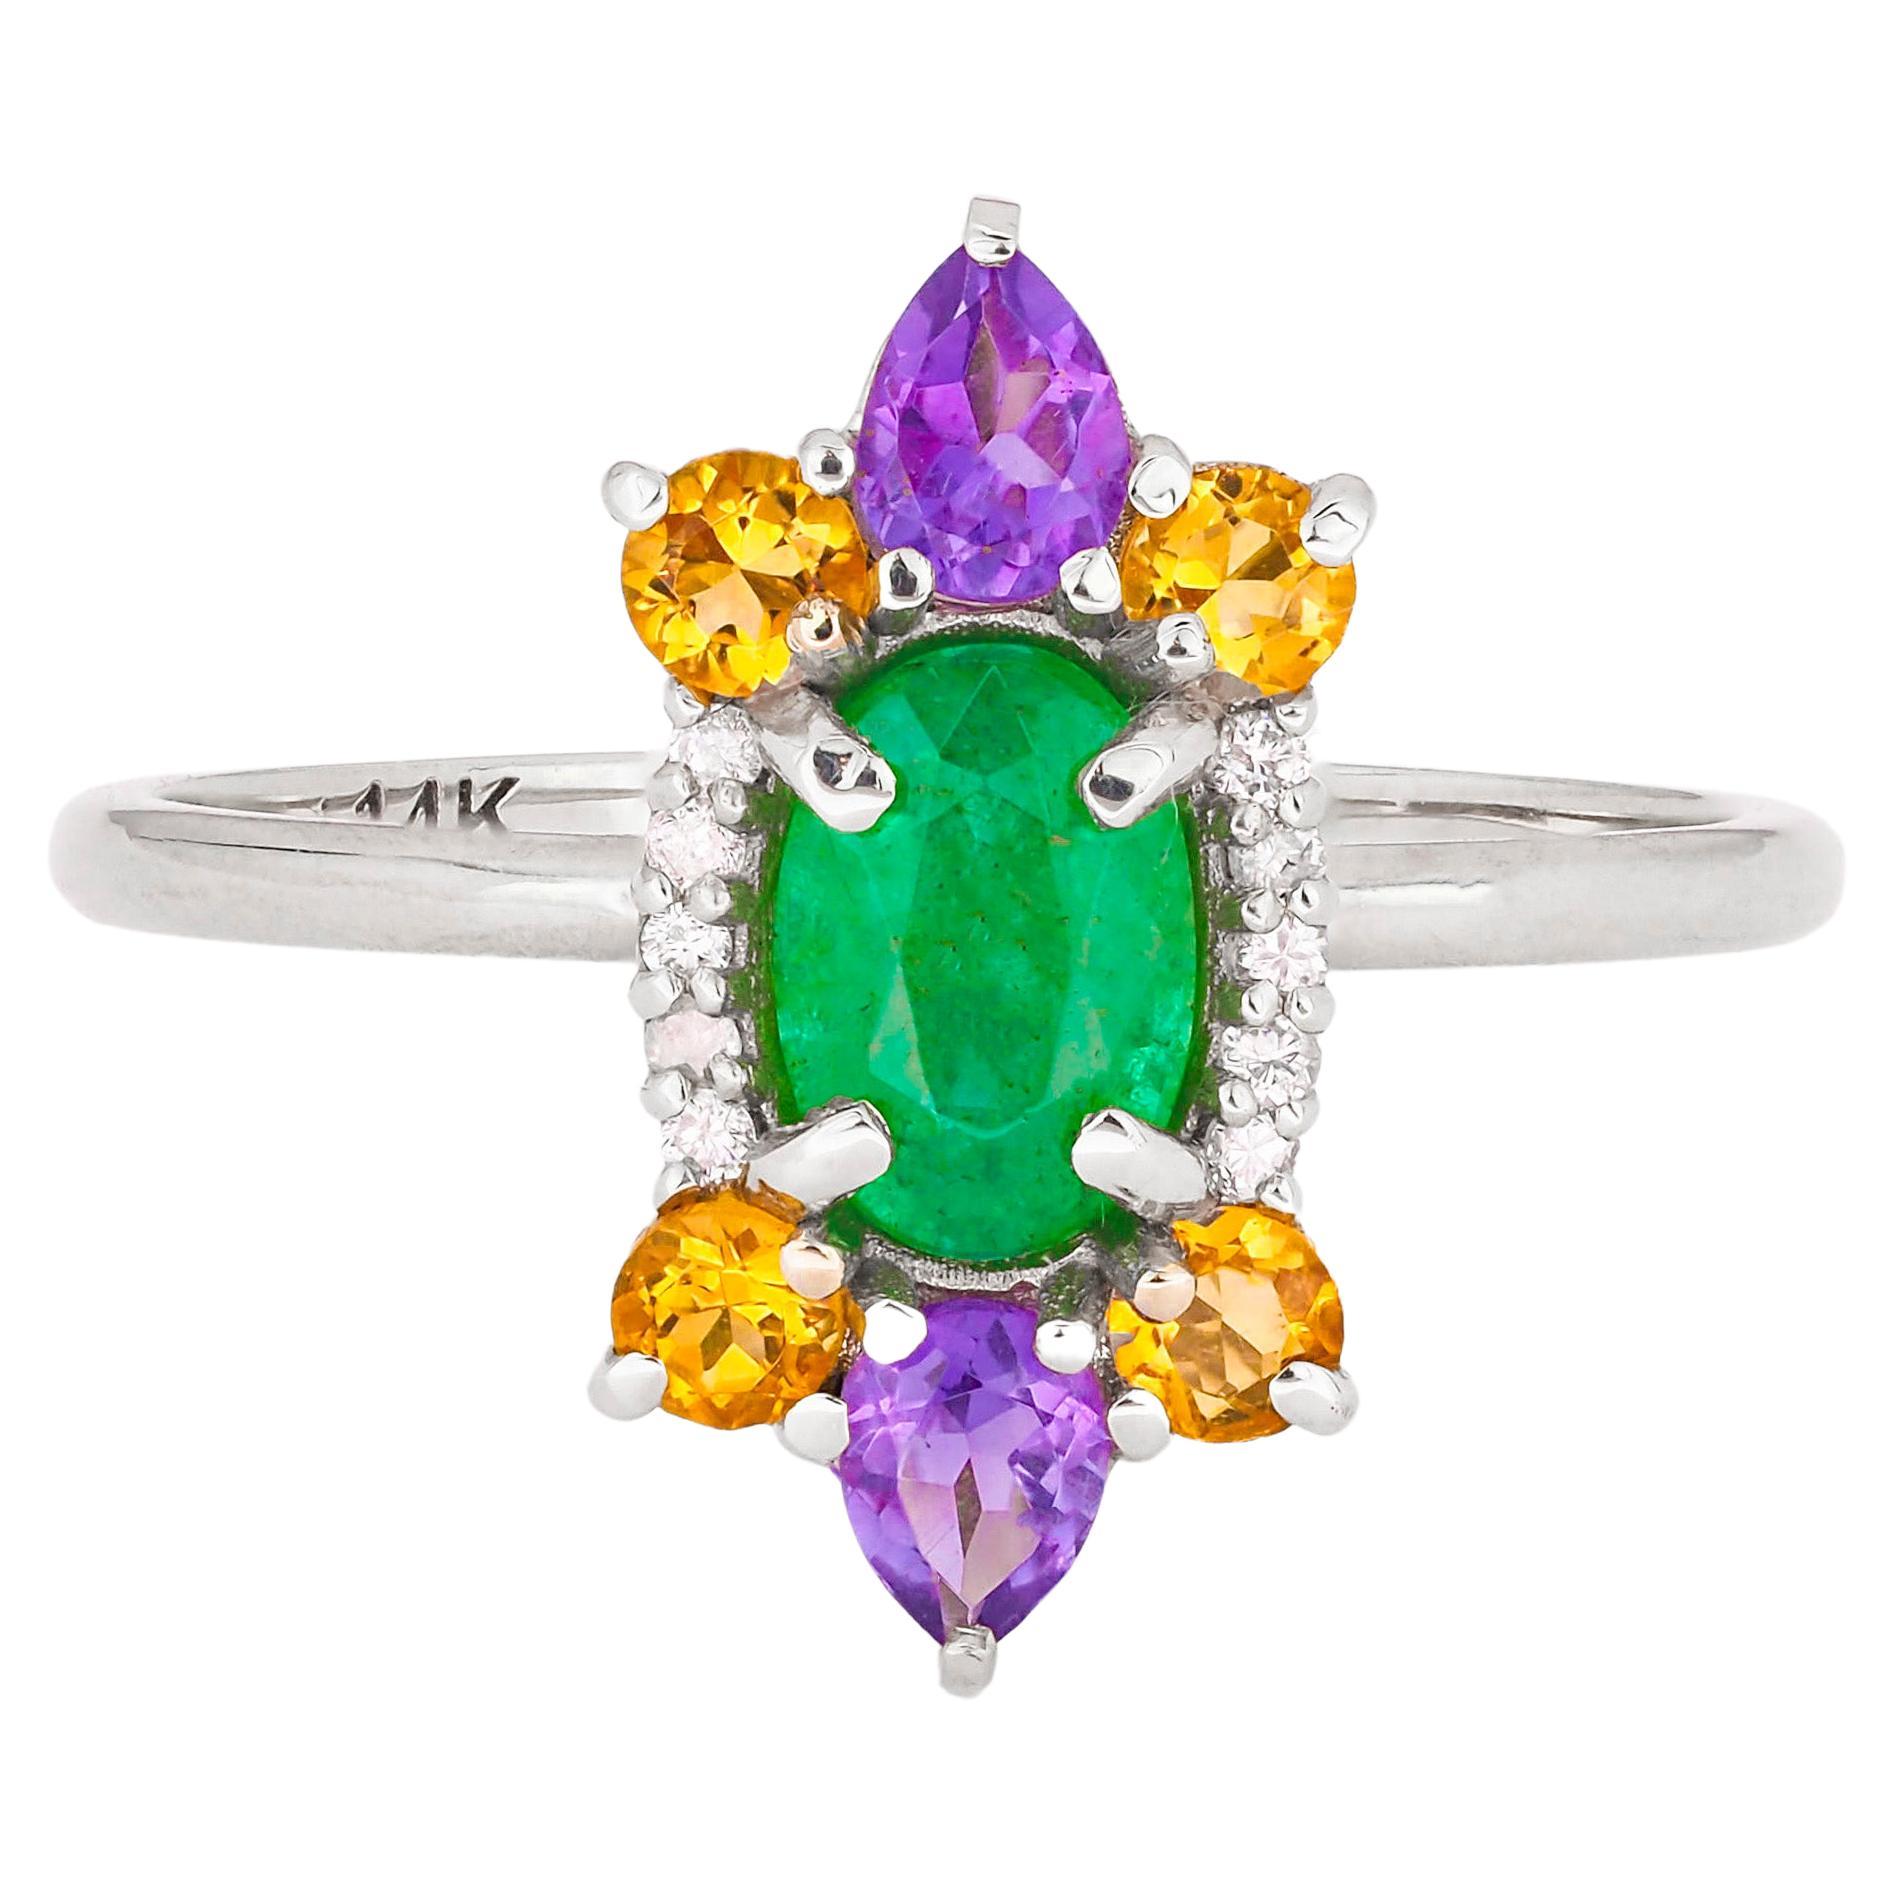 14 K Gold Ring with Oval Emerald, Sapphires, Amethysts and Diamonds!